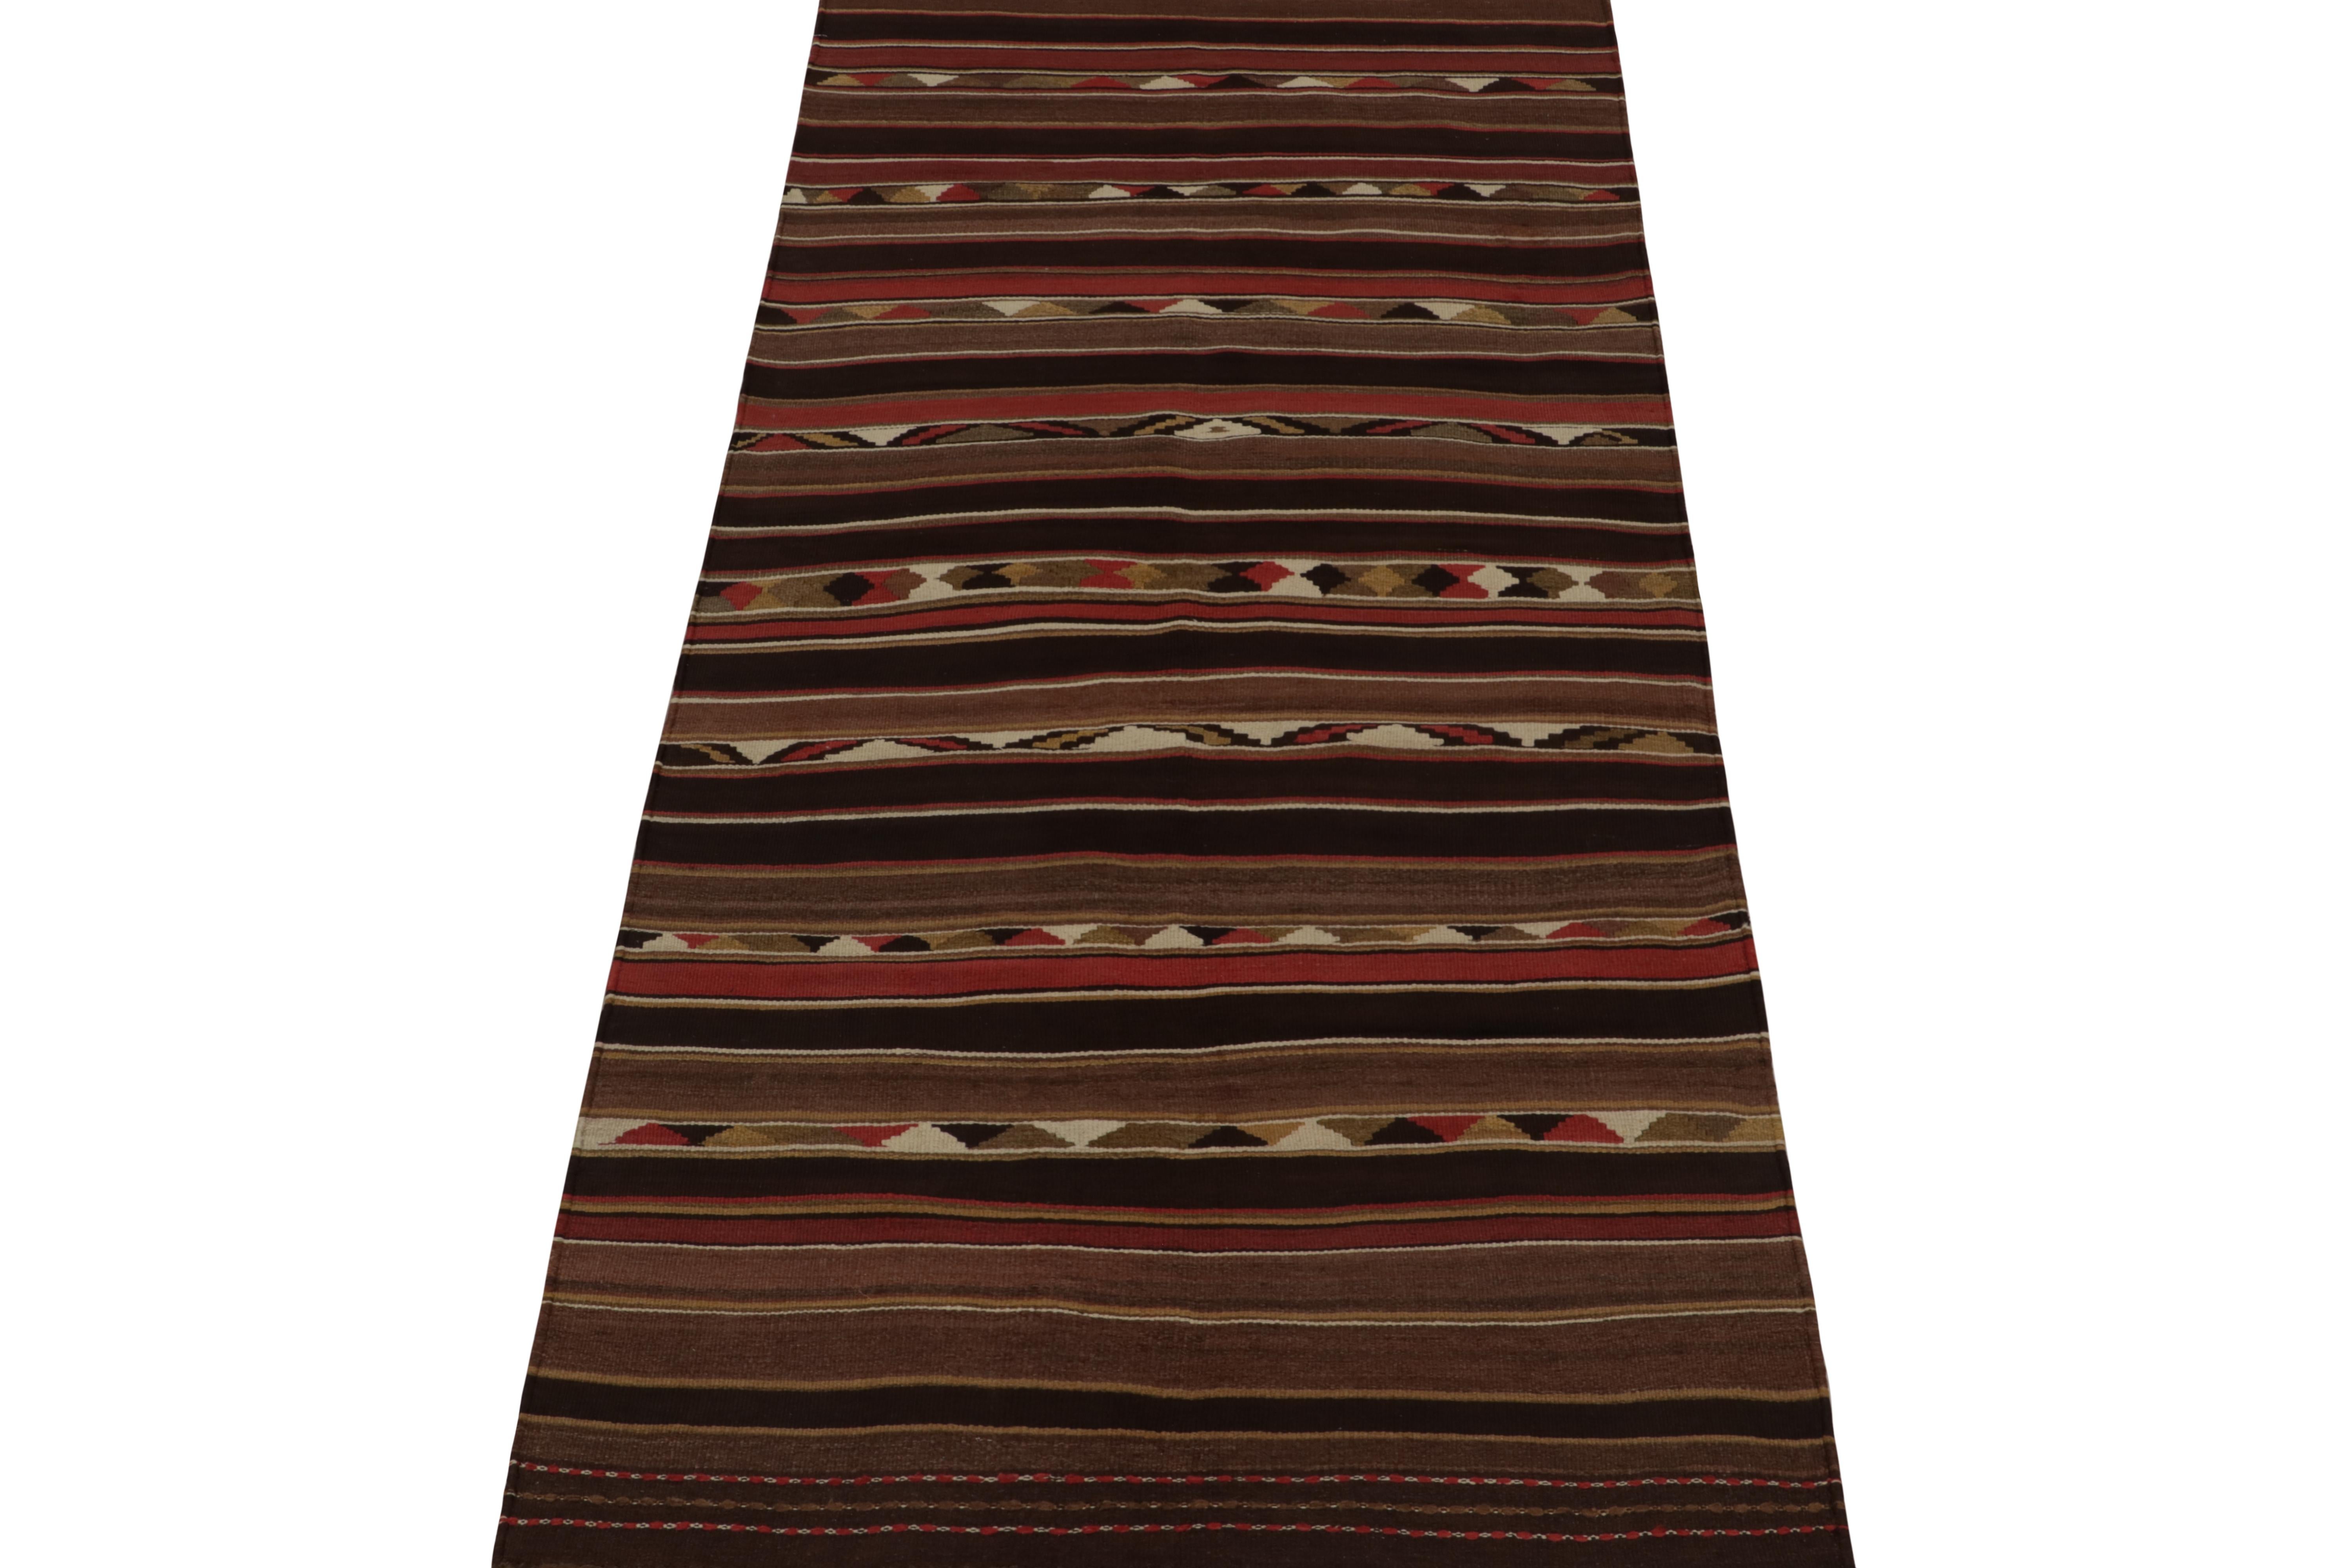 This vintage 4x9 Persian kilim is a tribal gallery—handwoven in wool circa 1950-1960.

Further on the Design:

This simple design has subtle intricacies in its play of stripes and geometry patterns with rich and bright colors alike. Keen eyes will